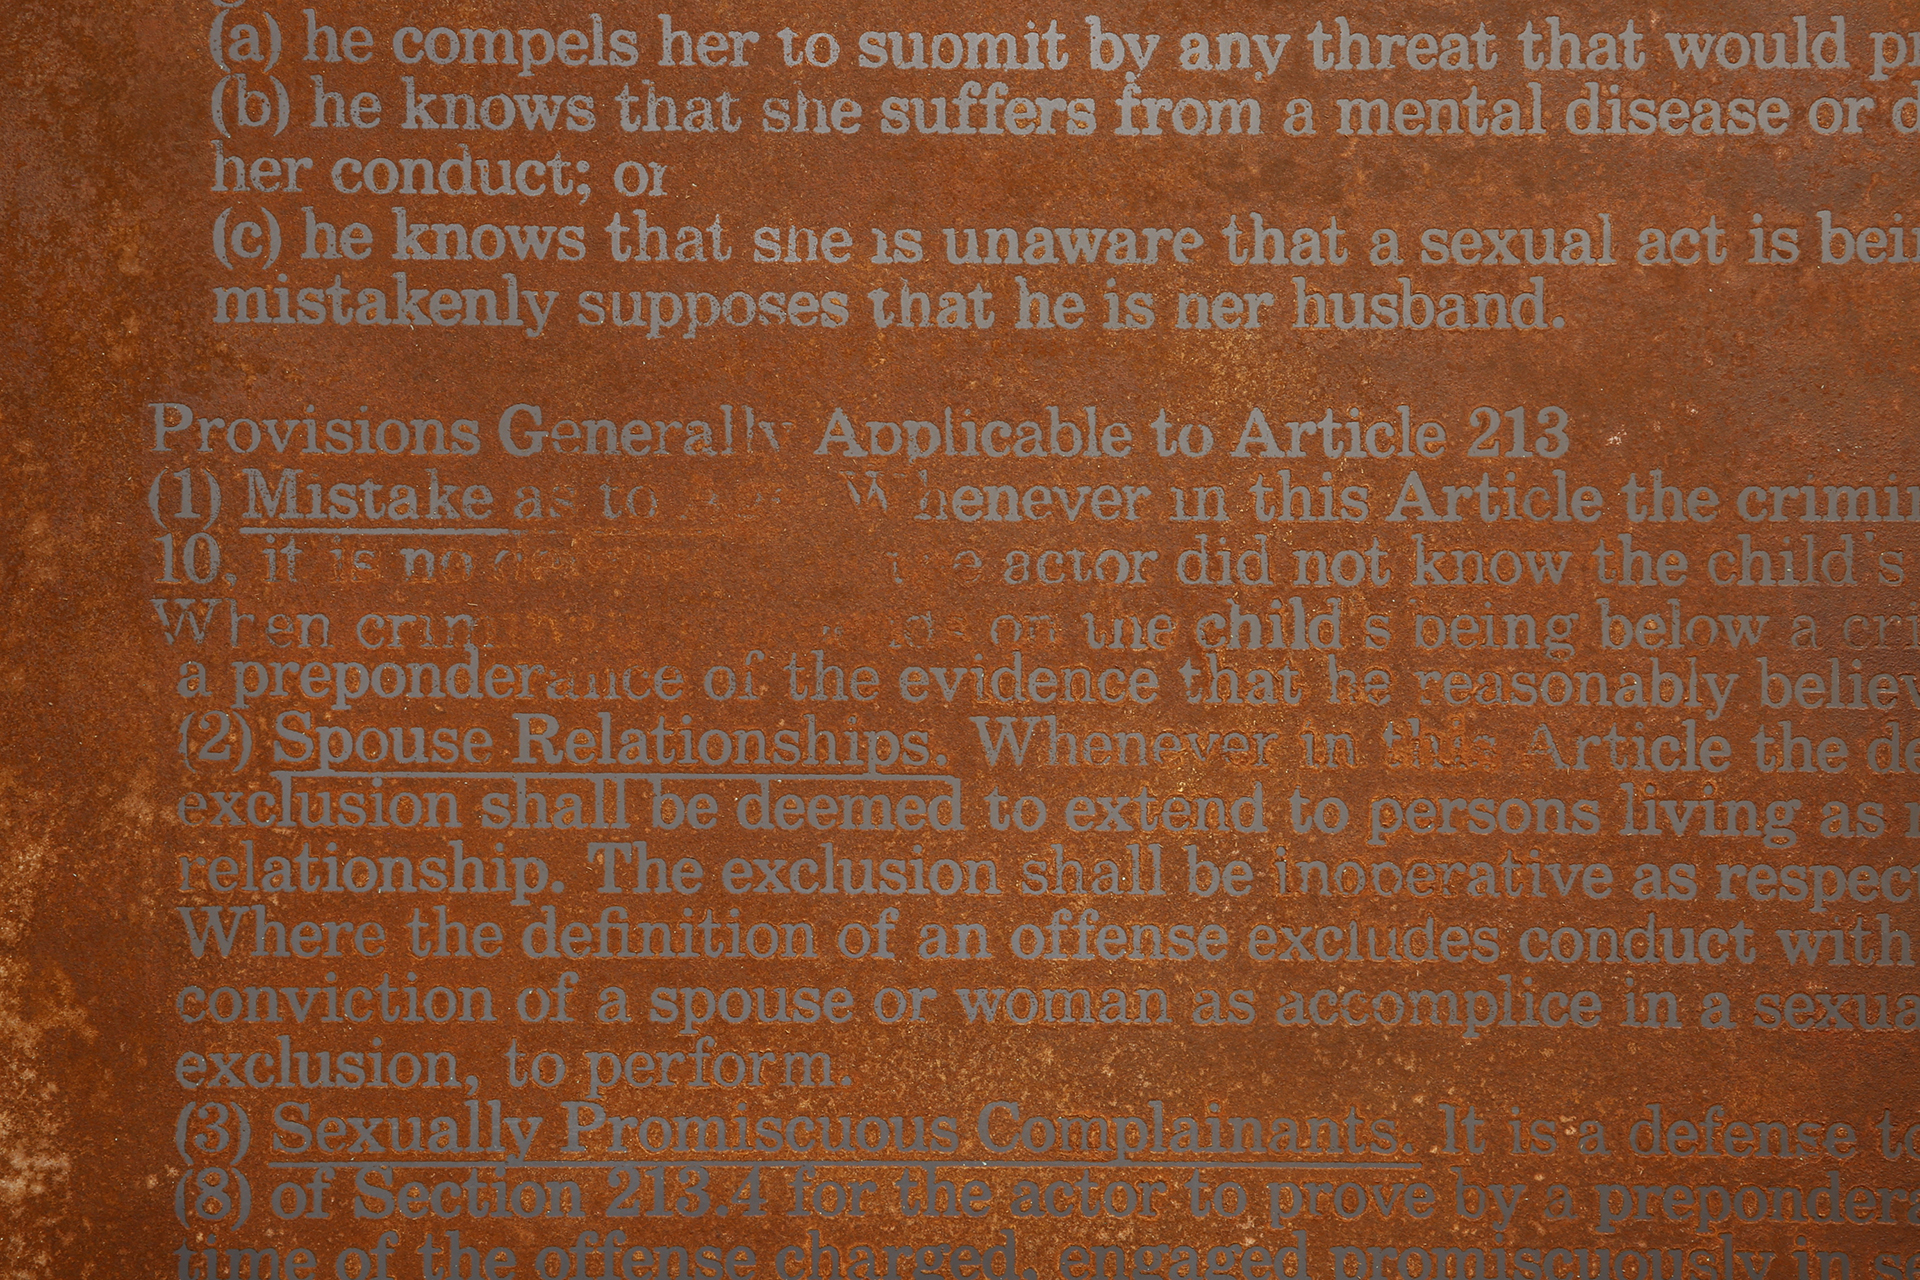 Screenprint resist on steel with rust patina, text of sections on rape from 1985 American Legal Institute Model Penal Code for standardizing state criminal laws